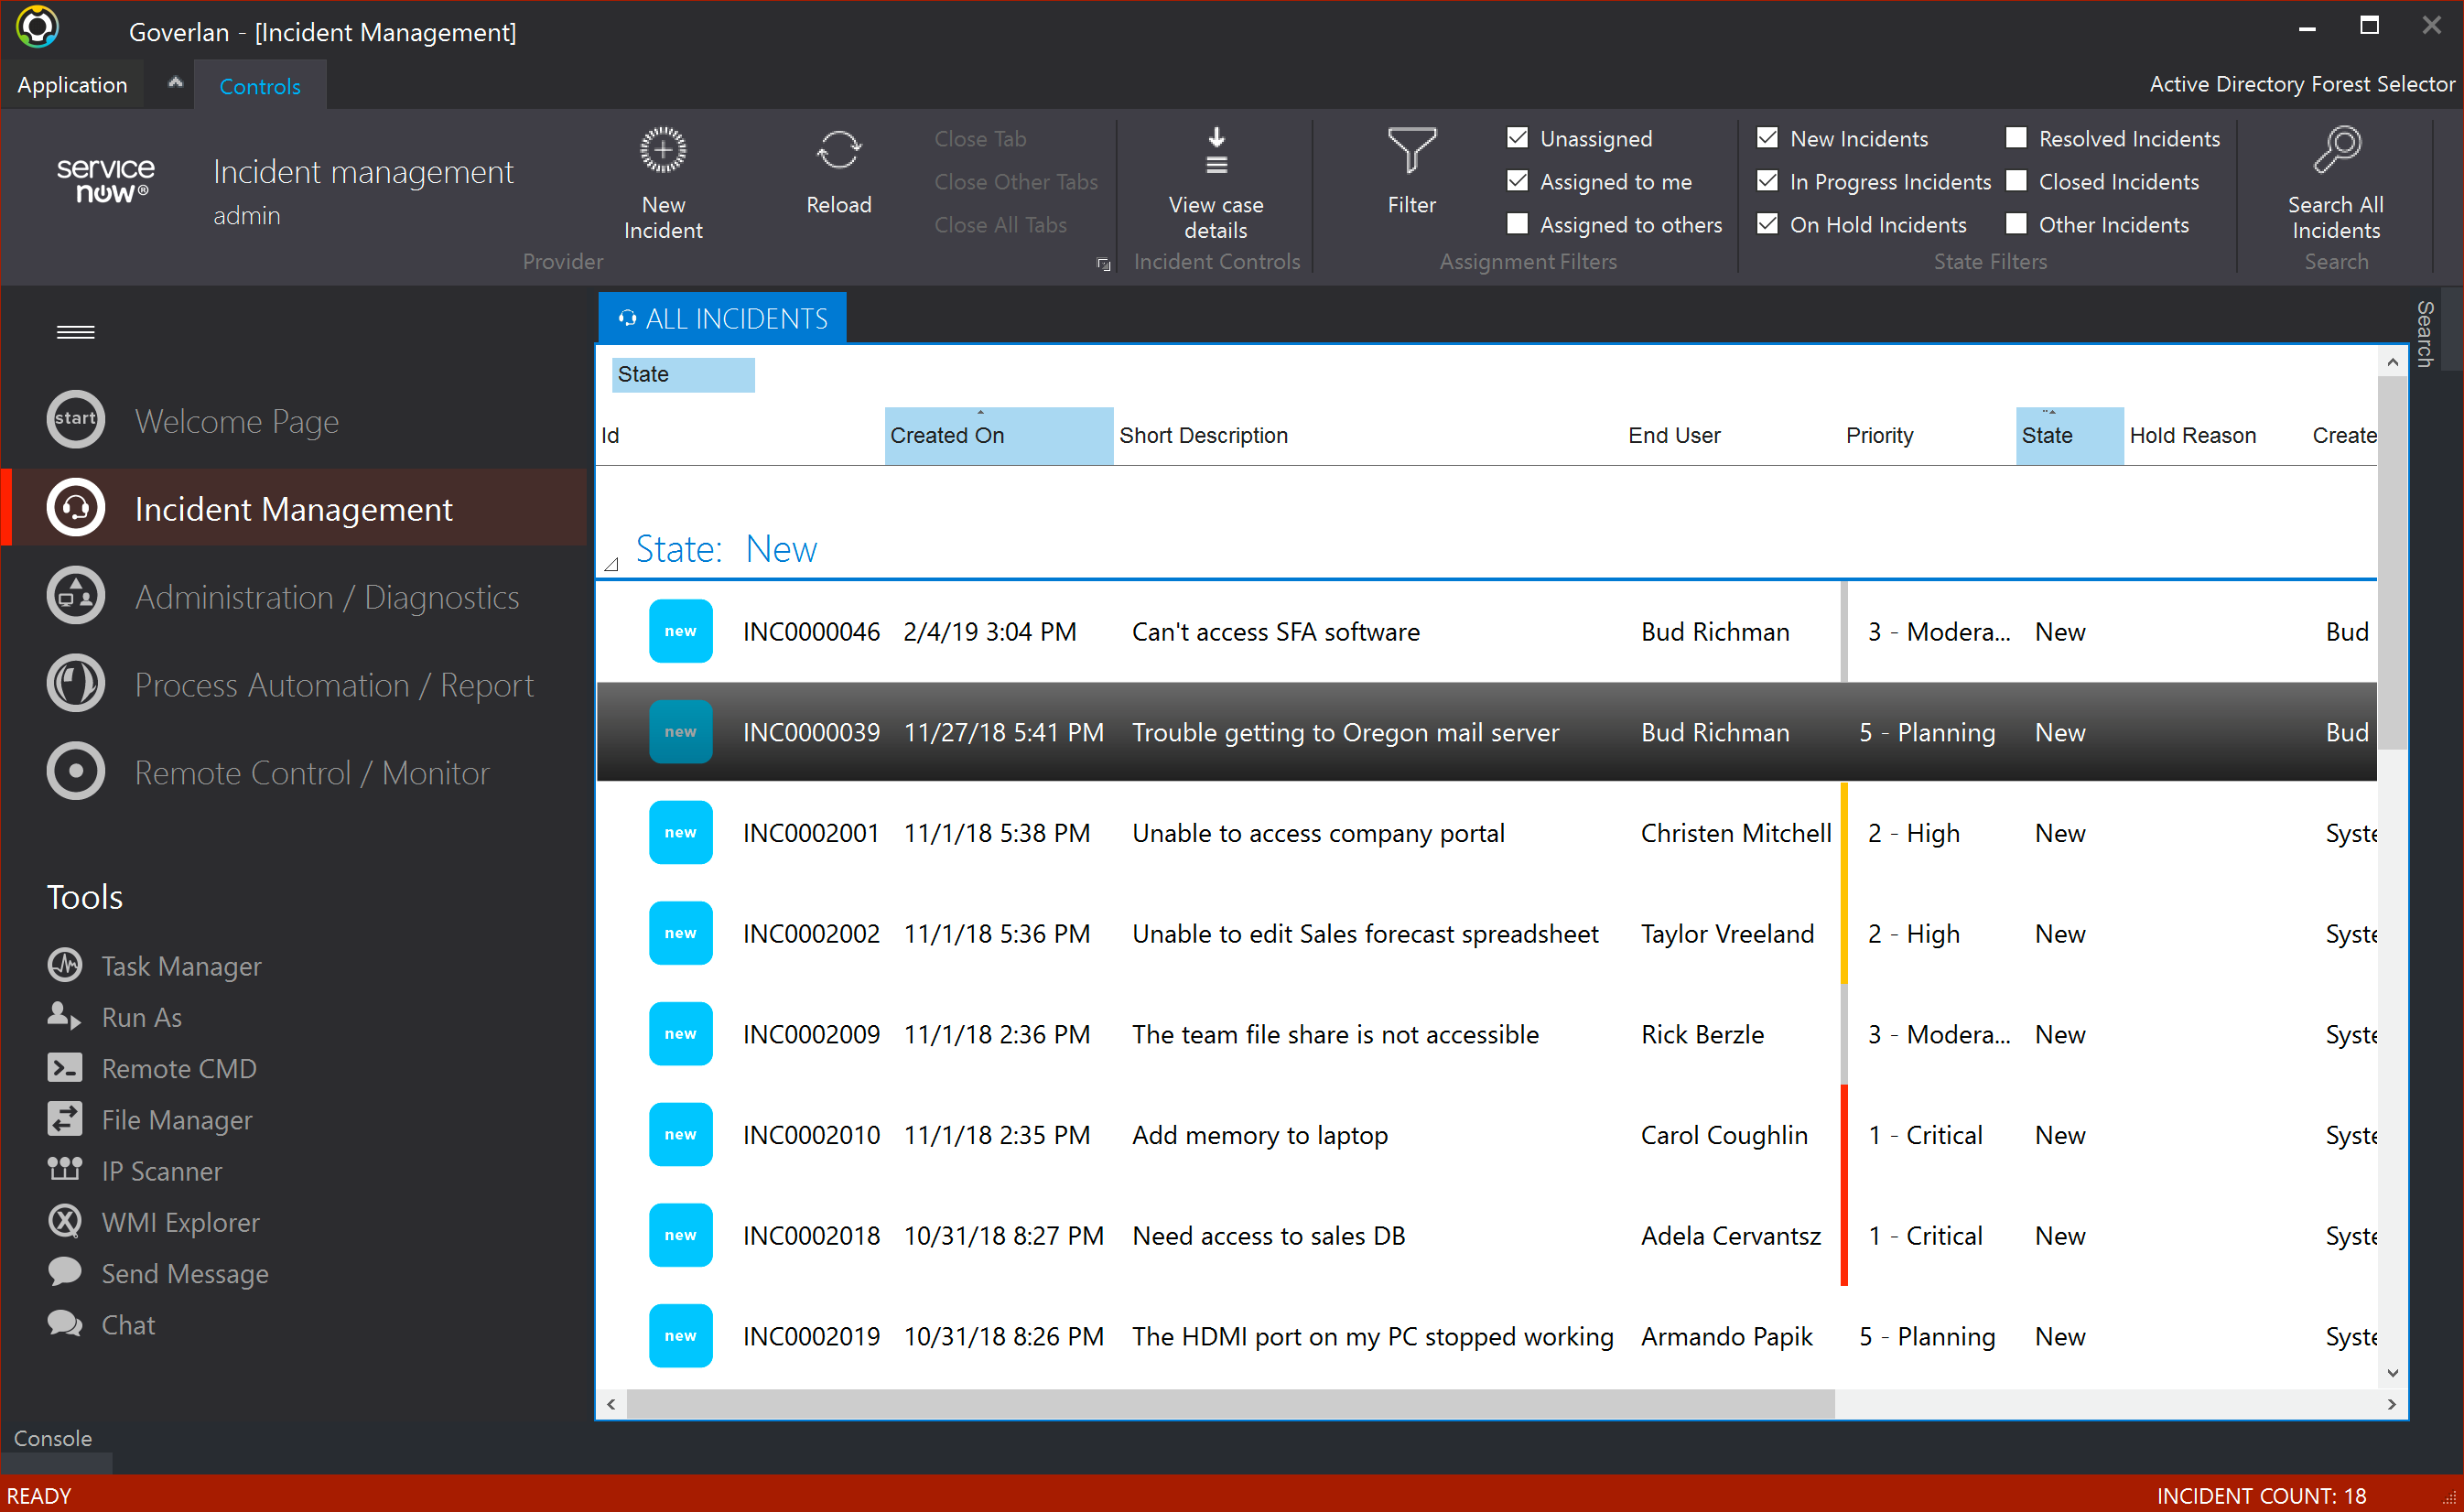 Goverlan Incident Management View